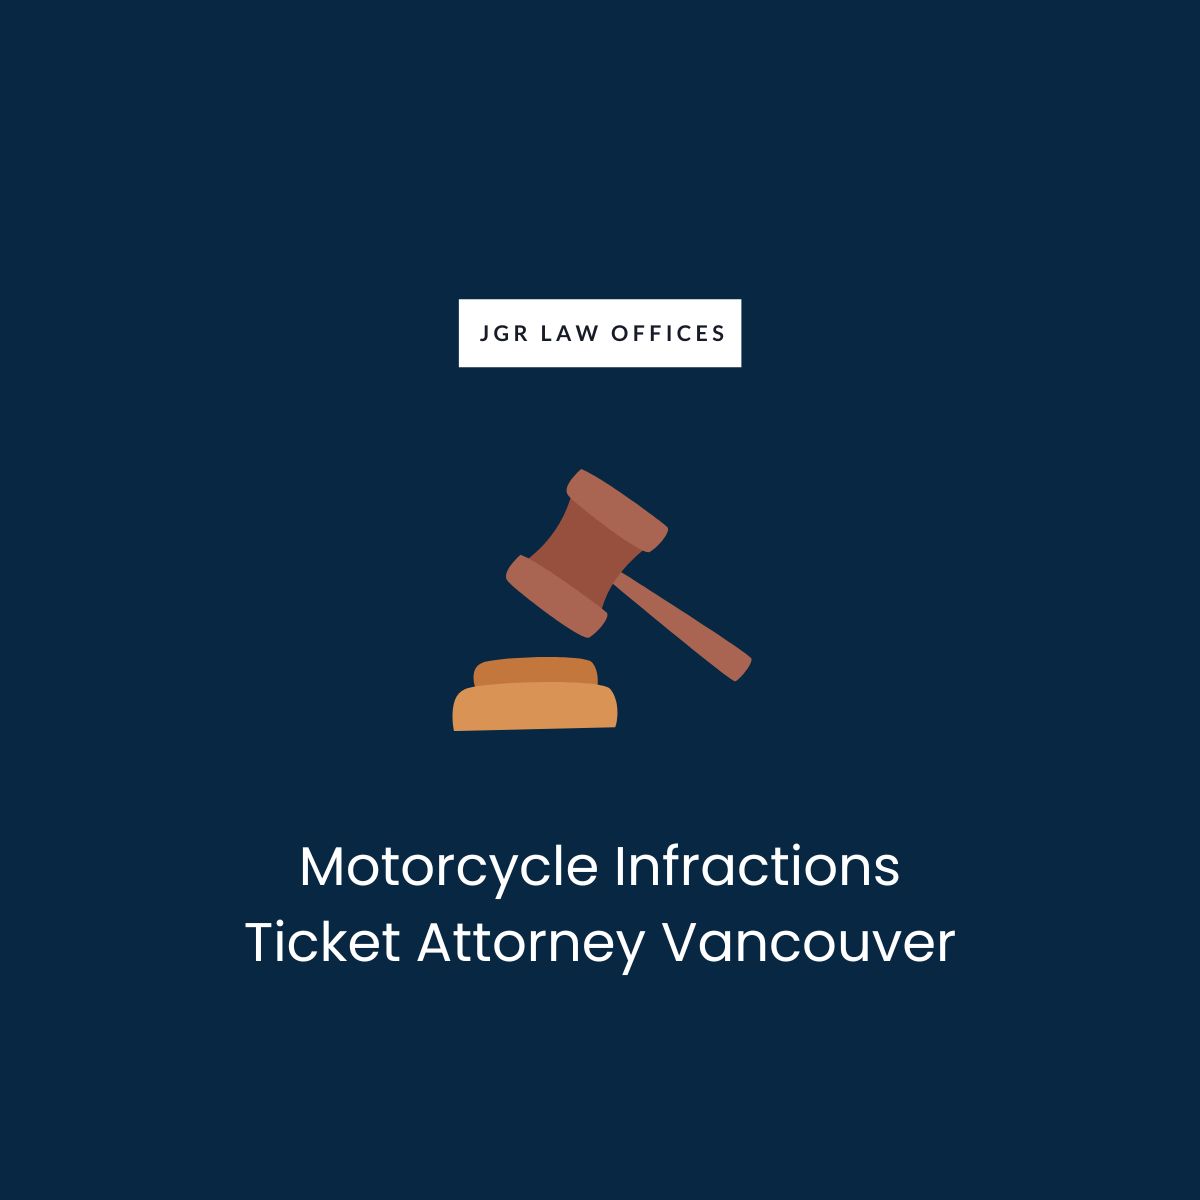 Motorcycle Infractions Ticket Attorney Vancouver